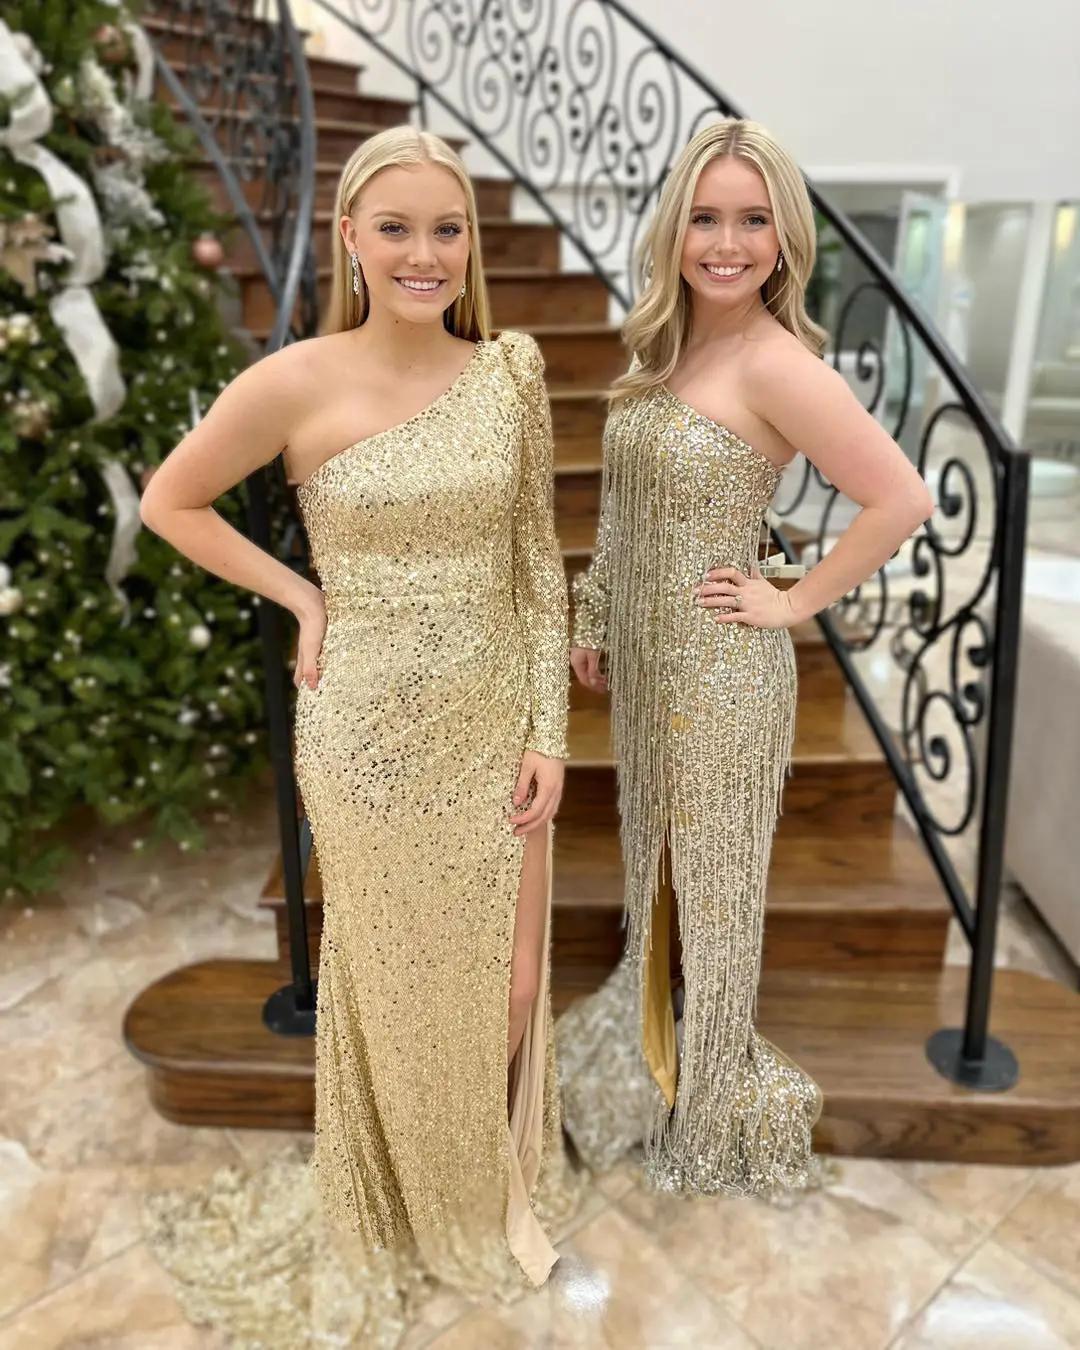 Two girls wearing prom dresses